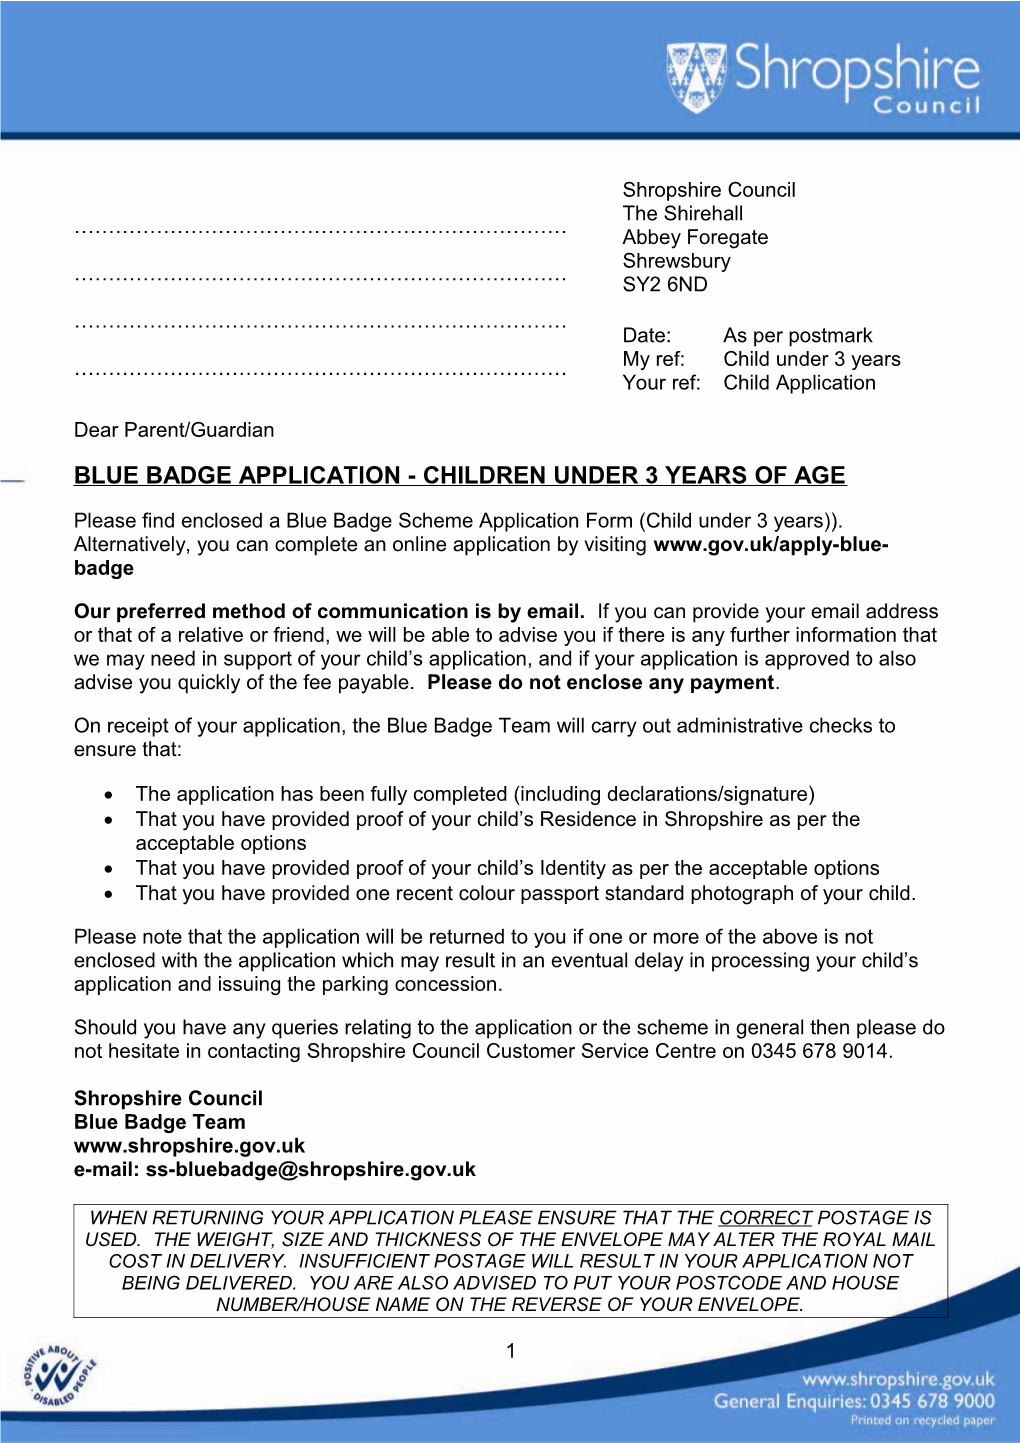 Blue Badge Application - Children Under 3 Years of Age